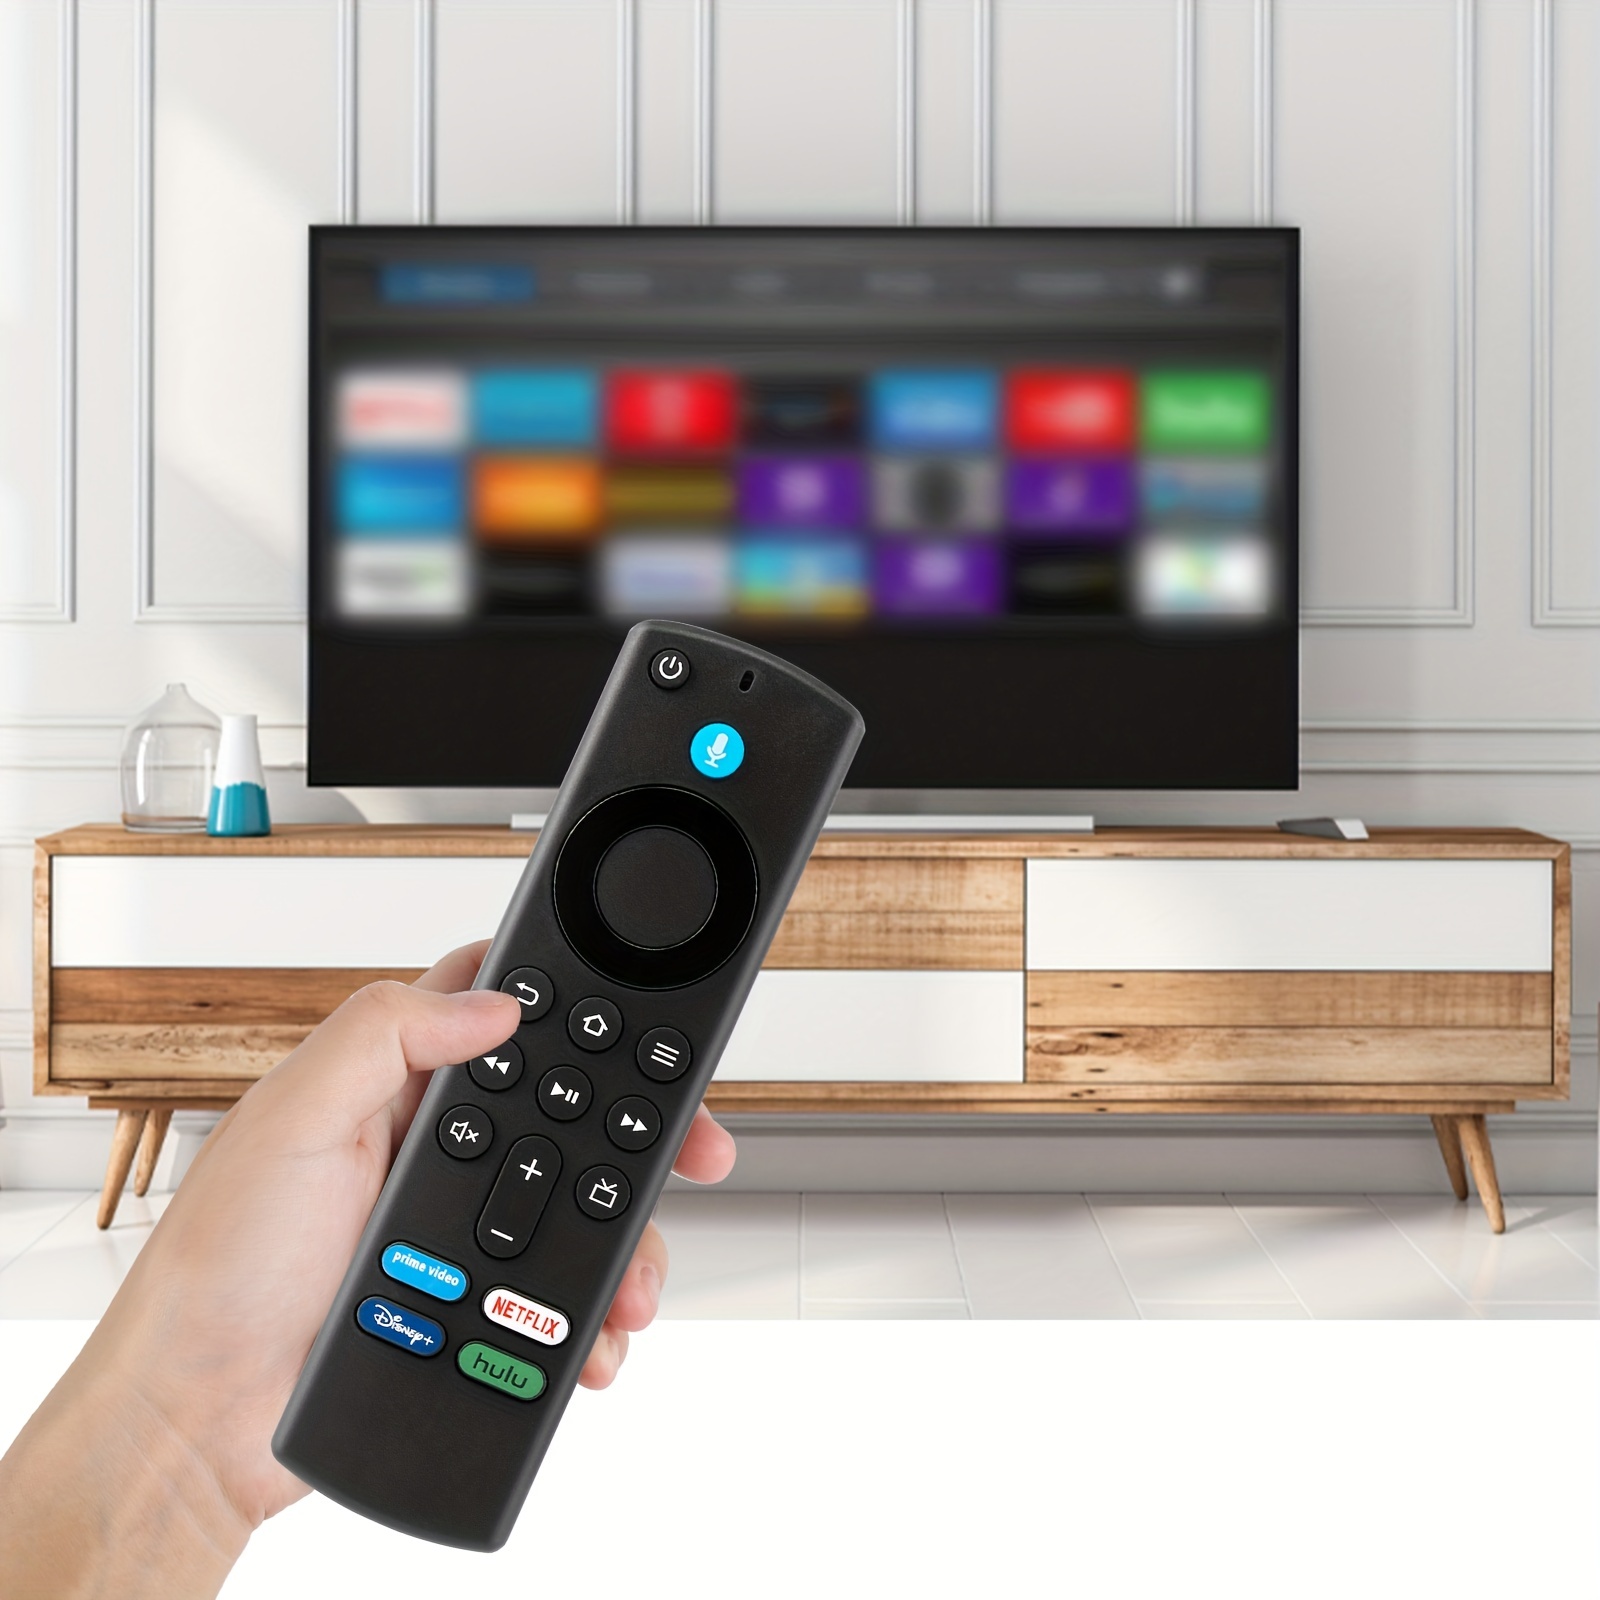 BroadLink Smart IR Remote Control Hub-WiFi IR Blaster for Smart Home  Automation, TV Remote, Compatible with Google Assistant, IFTTT (RM4 mini) 